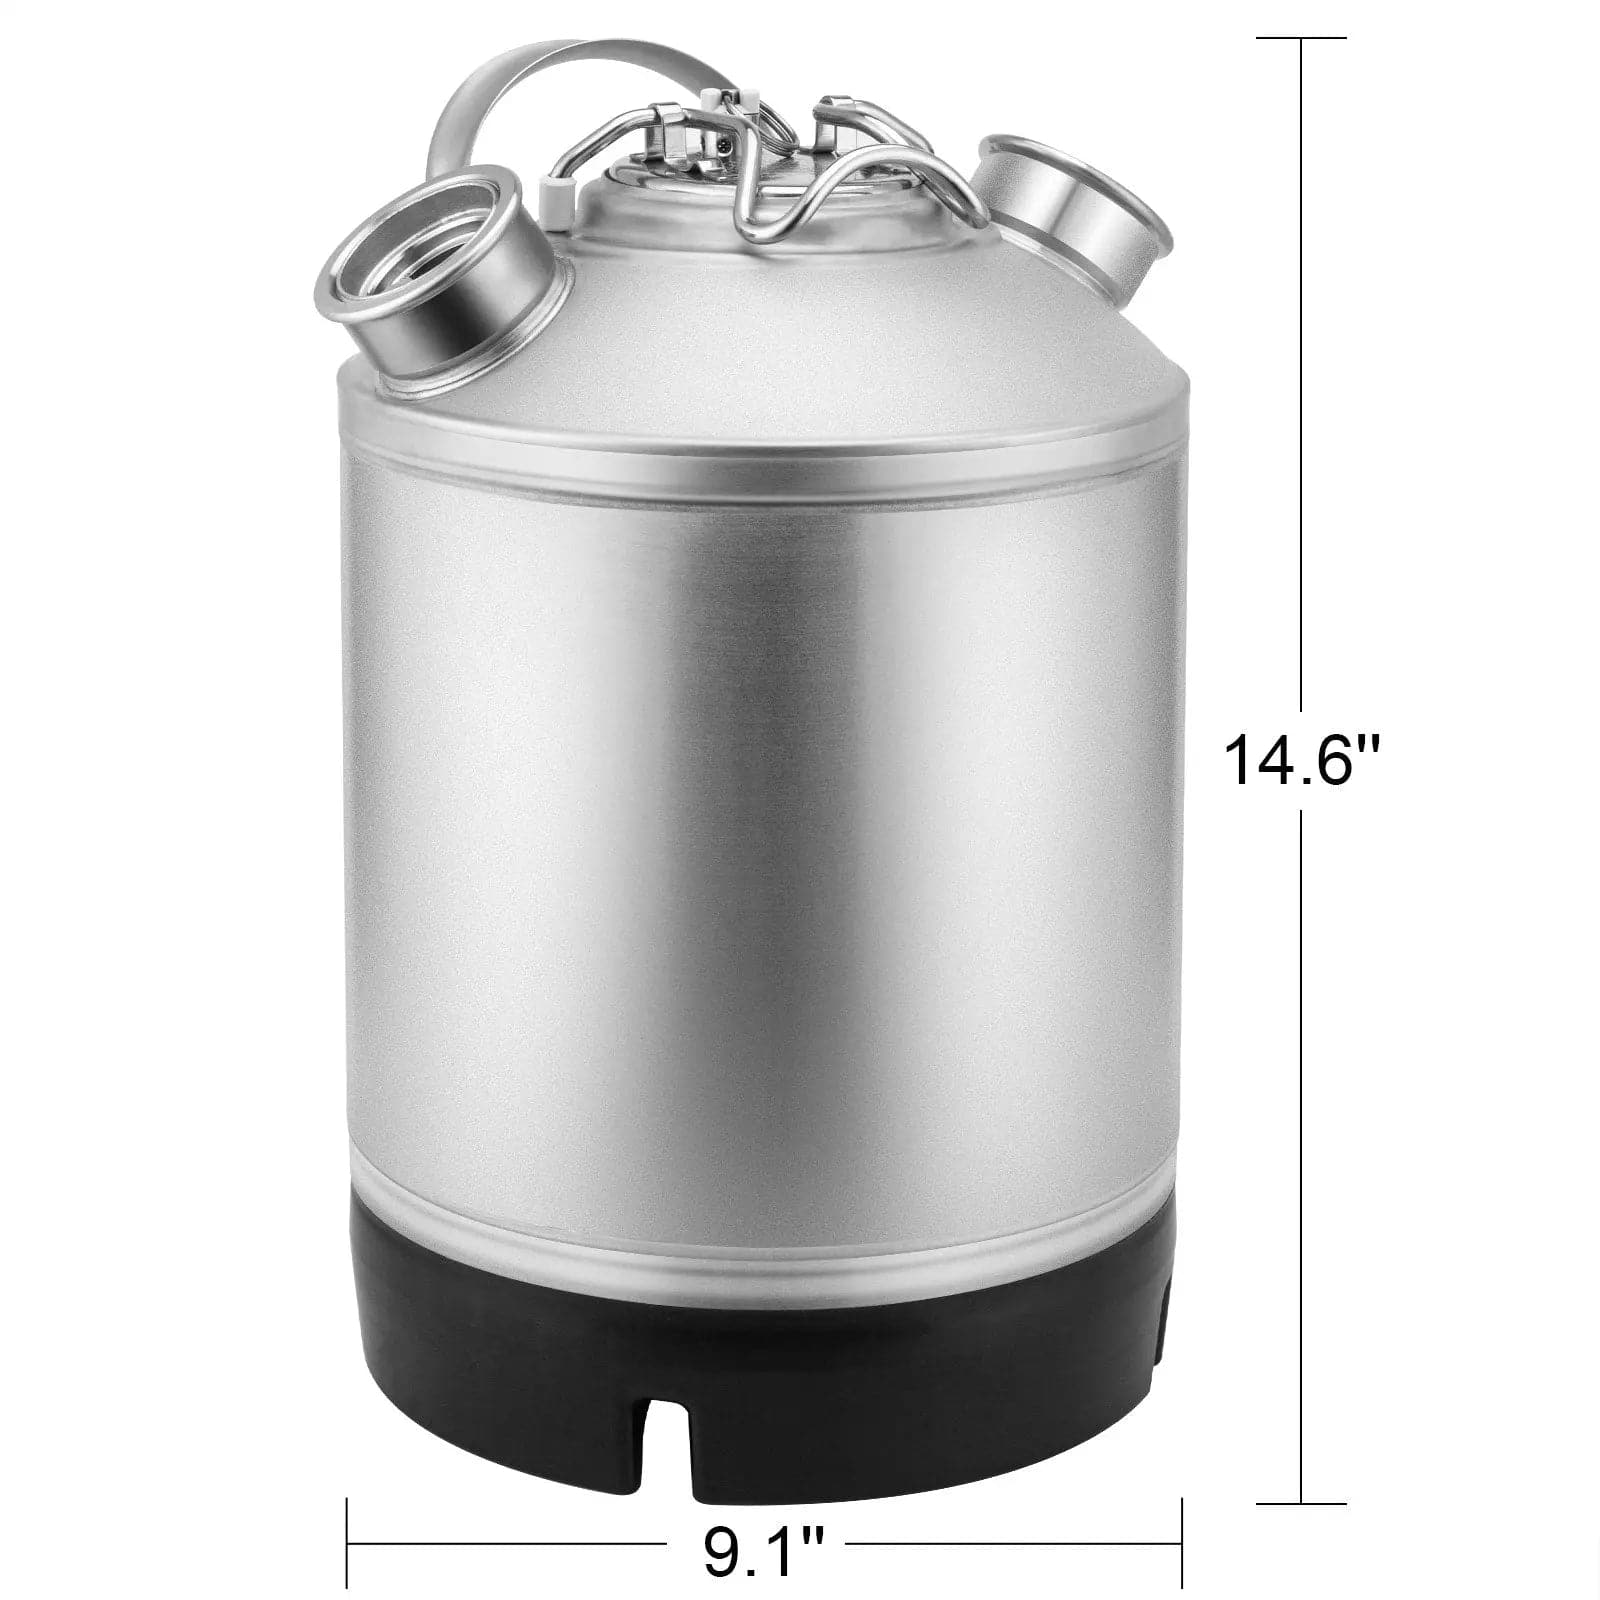 tmcraft 2.5 gallon cleaning keg size photo